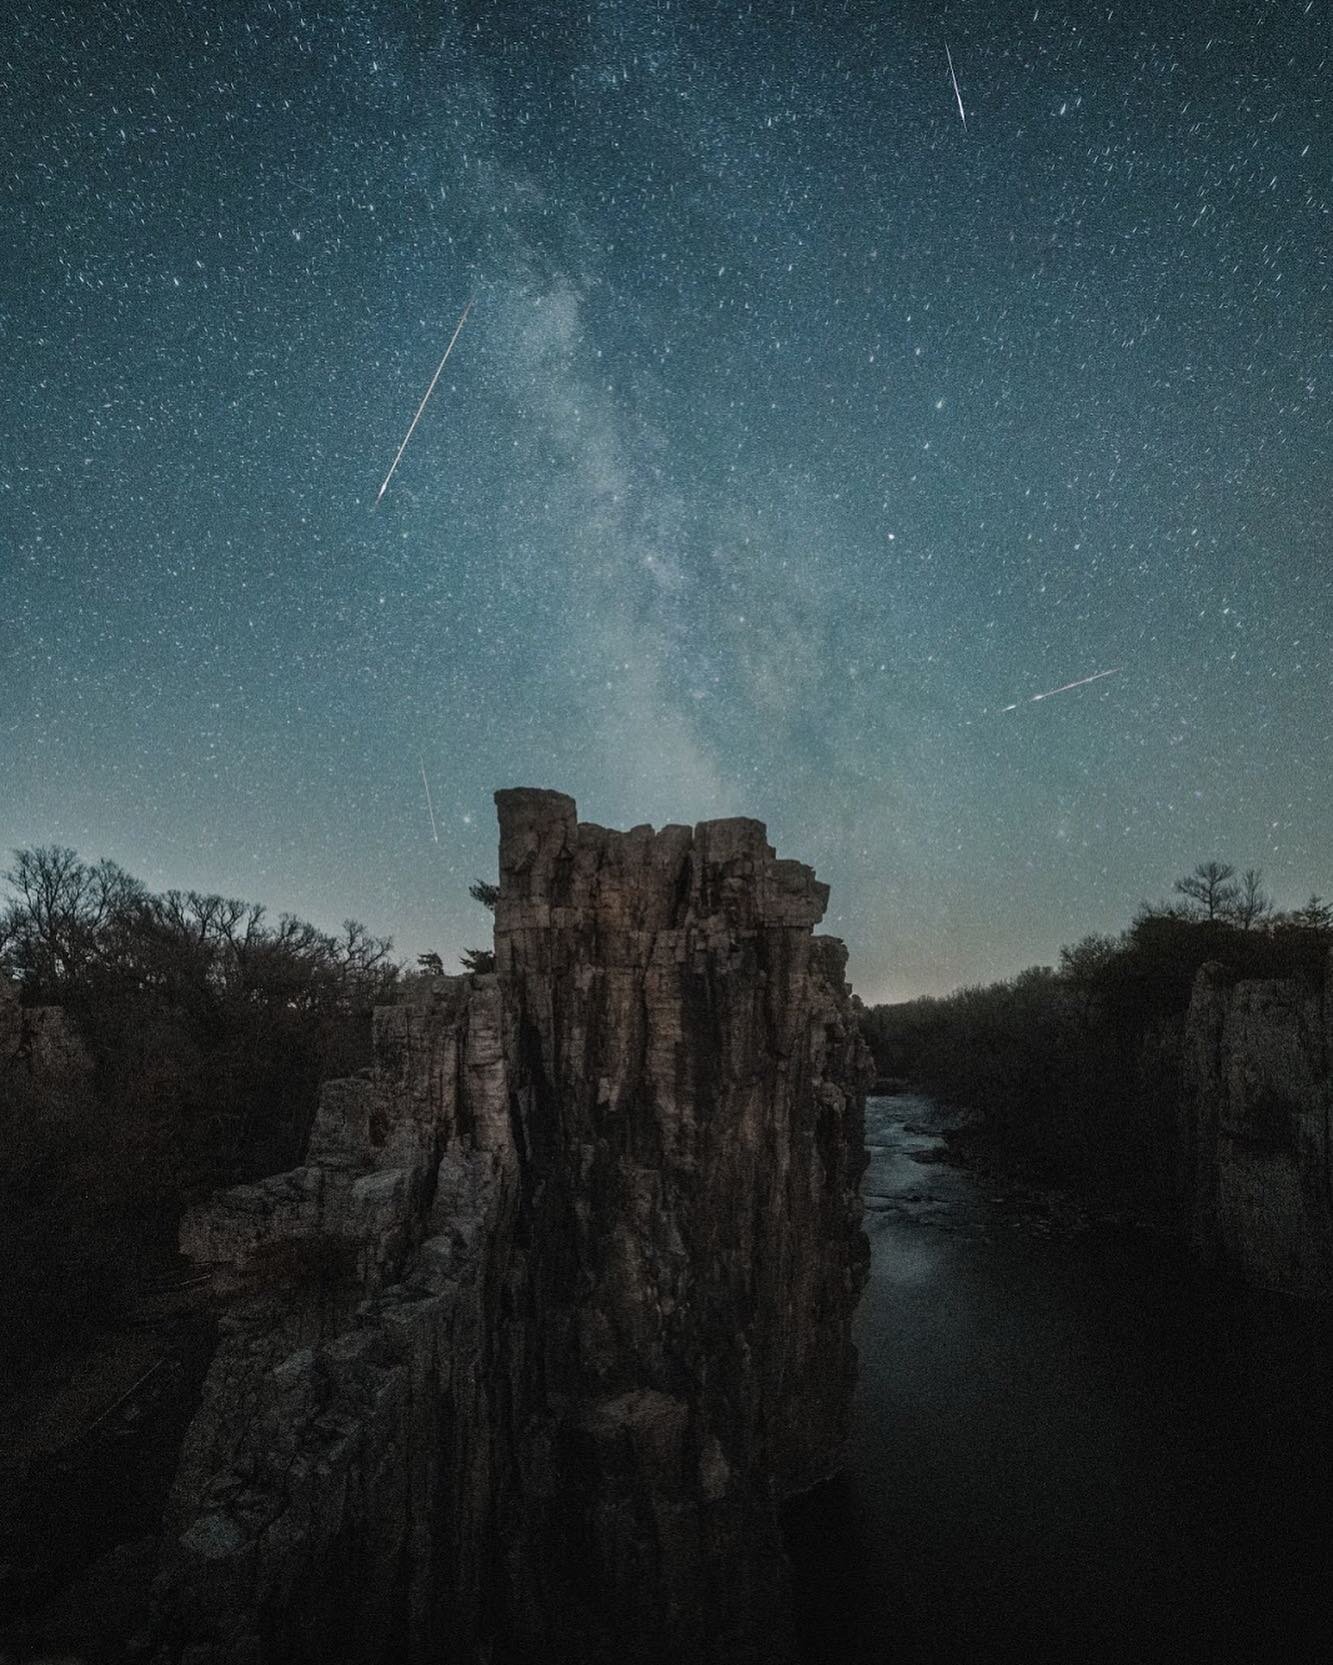 Palisades state park was the perfect spot with minimal light pollution 
so @coreygross &amp; I stayed out late catching the Lyrid meteor shower.
📷 💫👌🏻
&bull;
&bull;
&bull;
&bull;
&bull;
#lyridmeteorshower #astrophotography #palisadesstatepark #pa